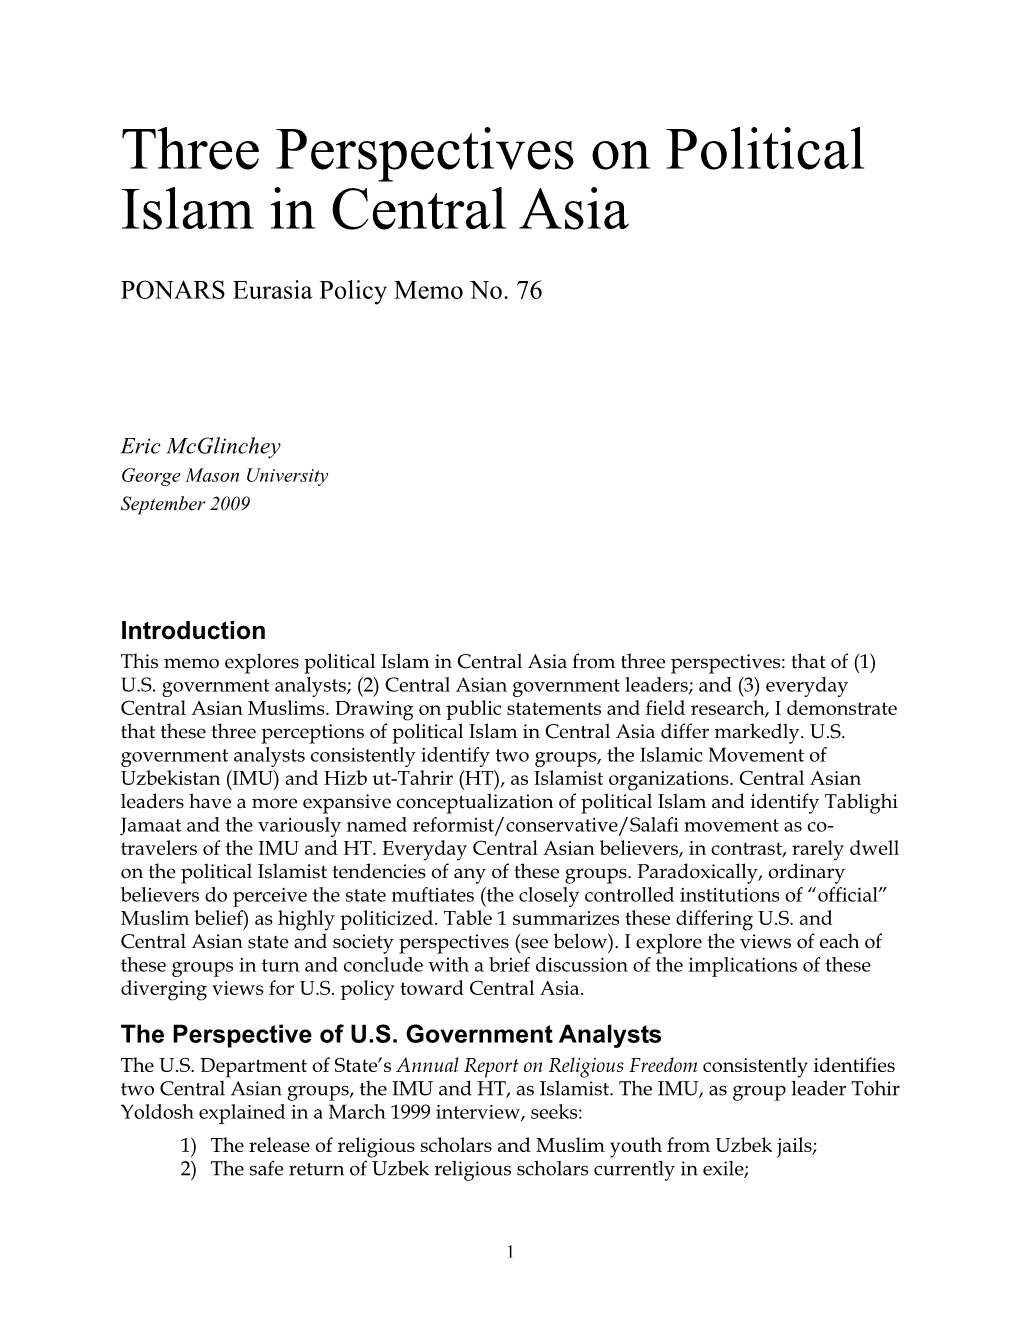 Three Perspectives on Political Islam in Central Asia